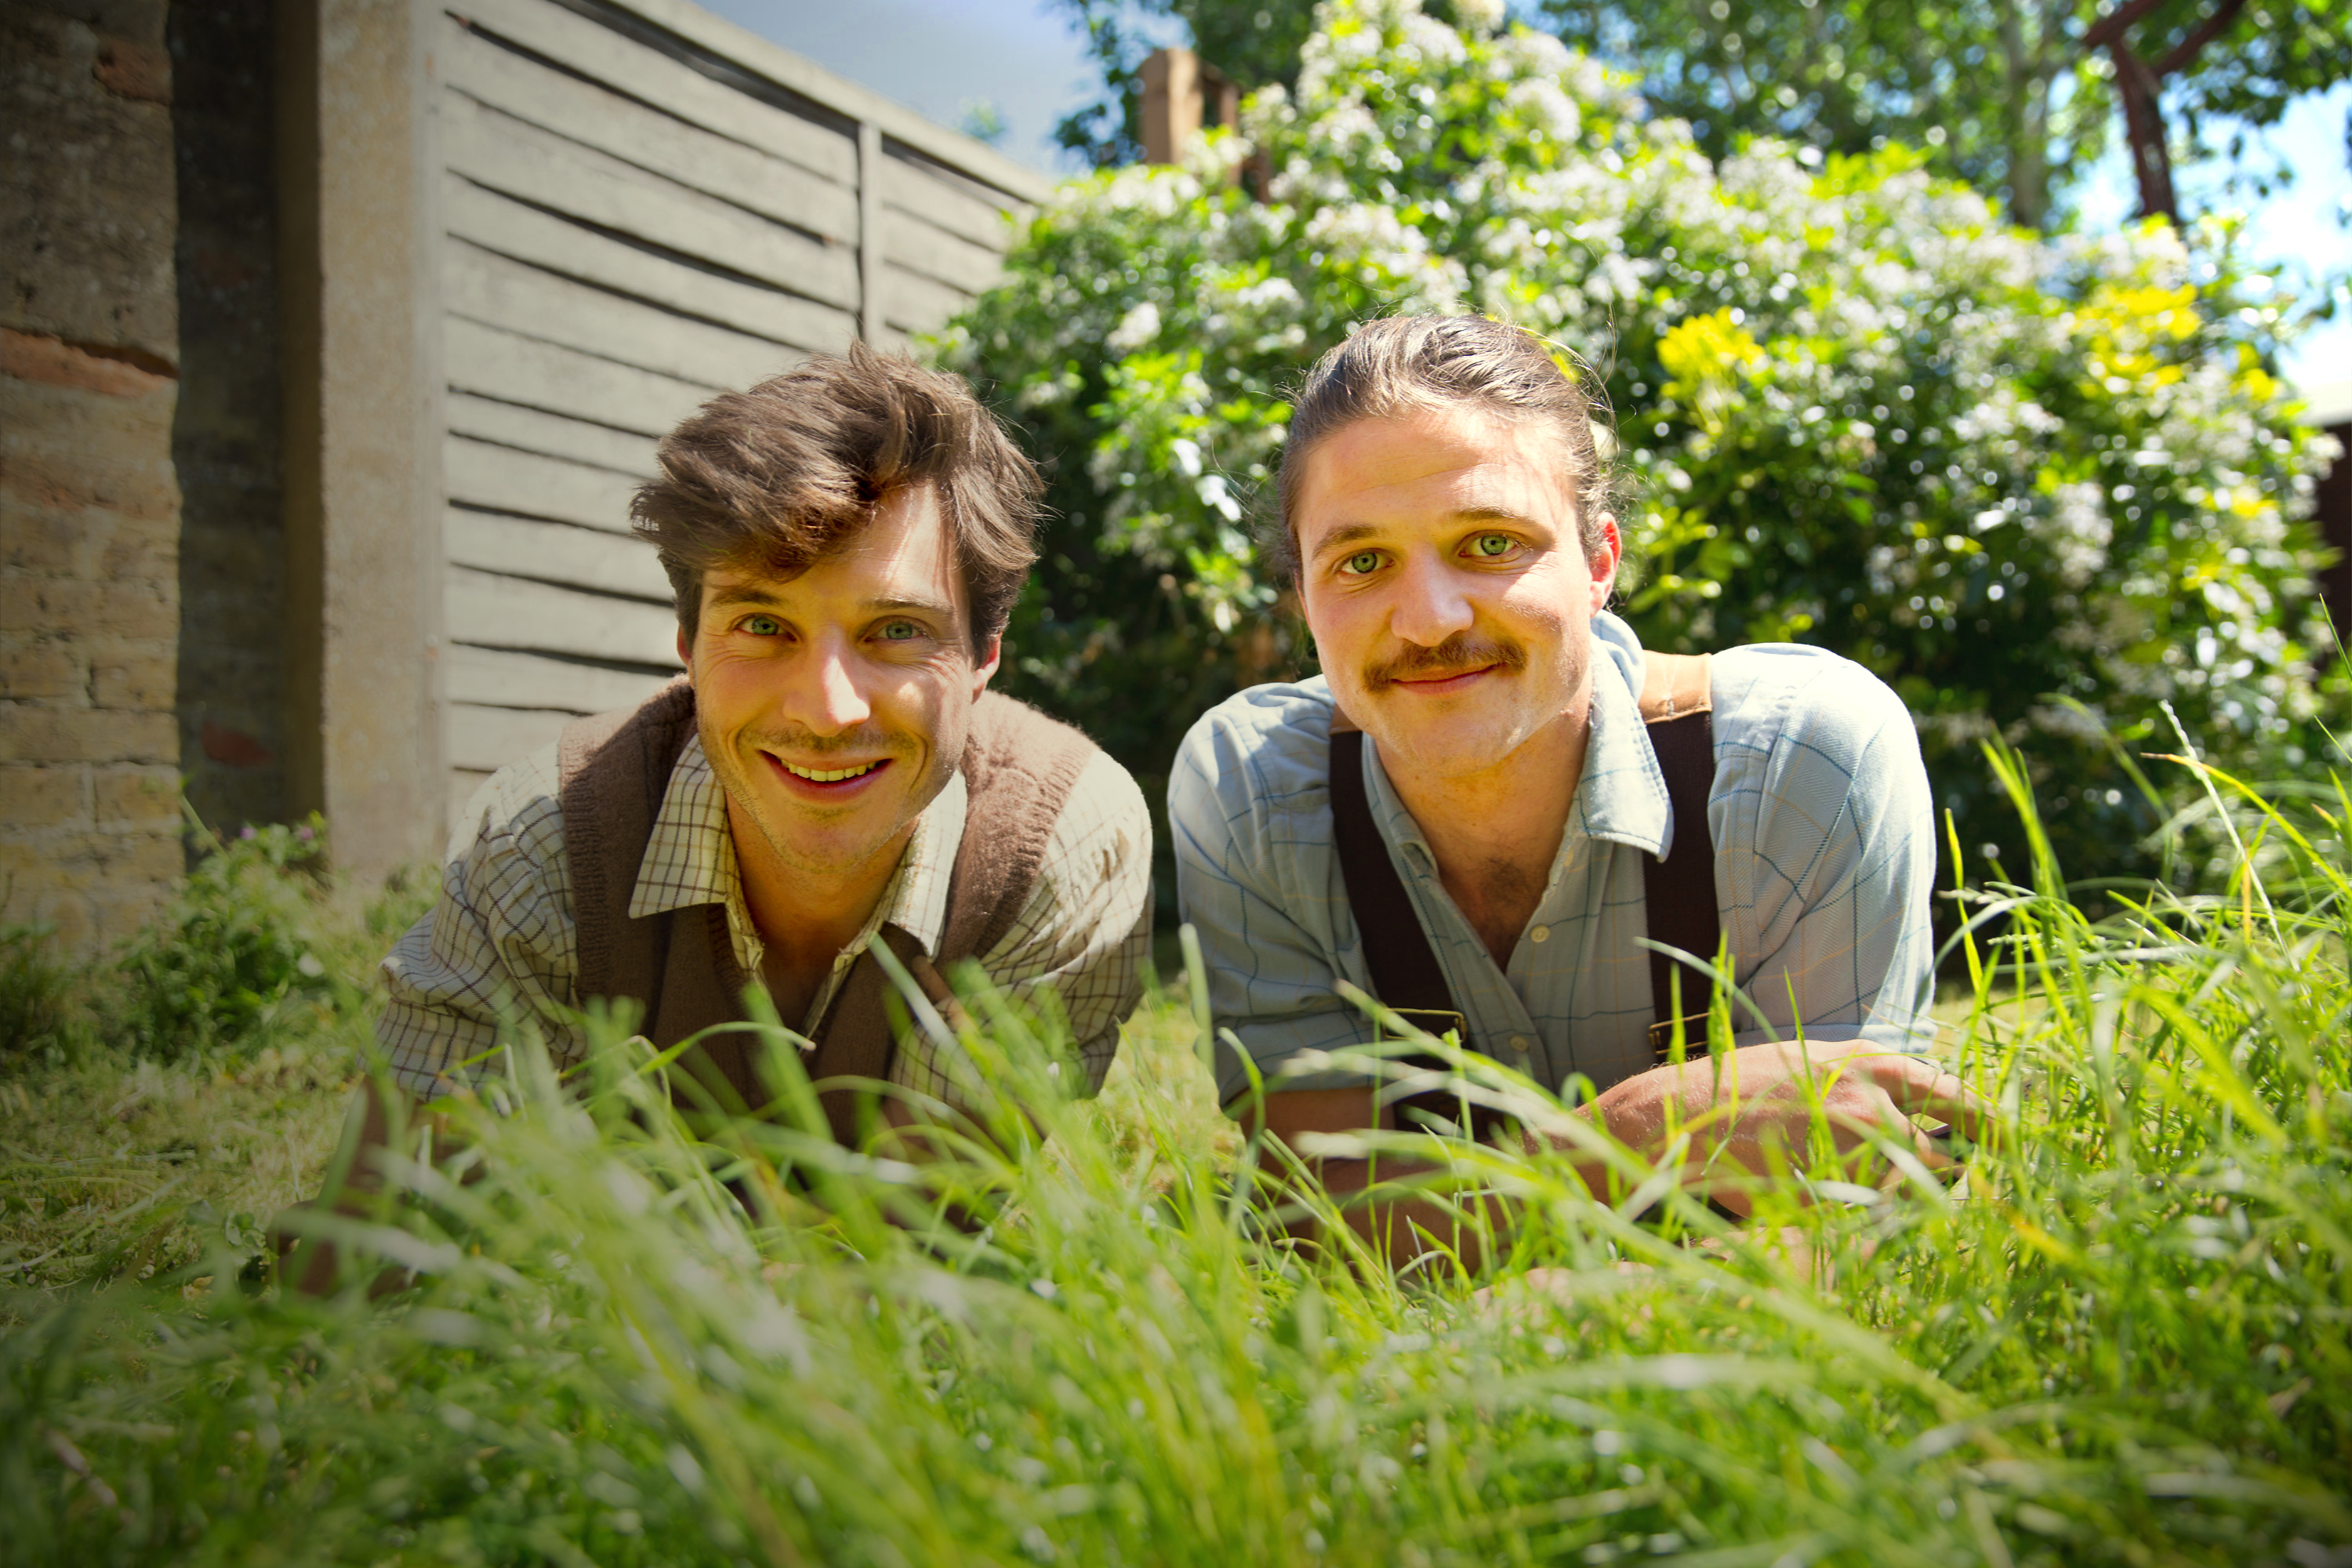 Award-winning garden designers the Rich brothers Harry and David (right) (Amazon/PA)